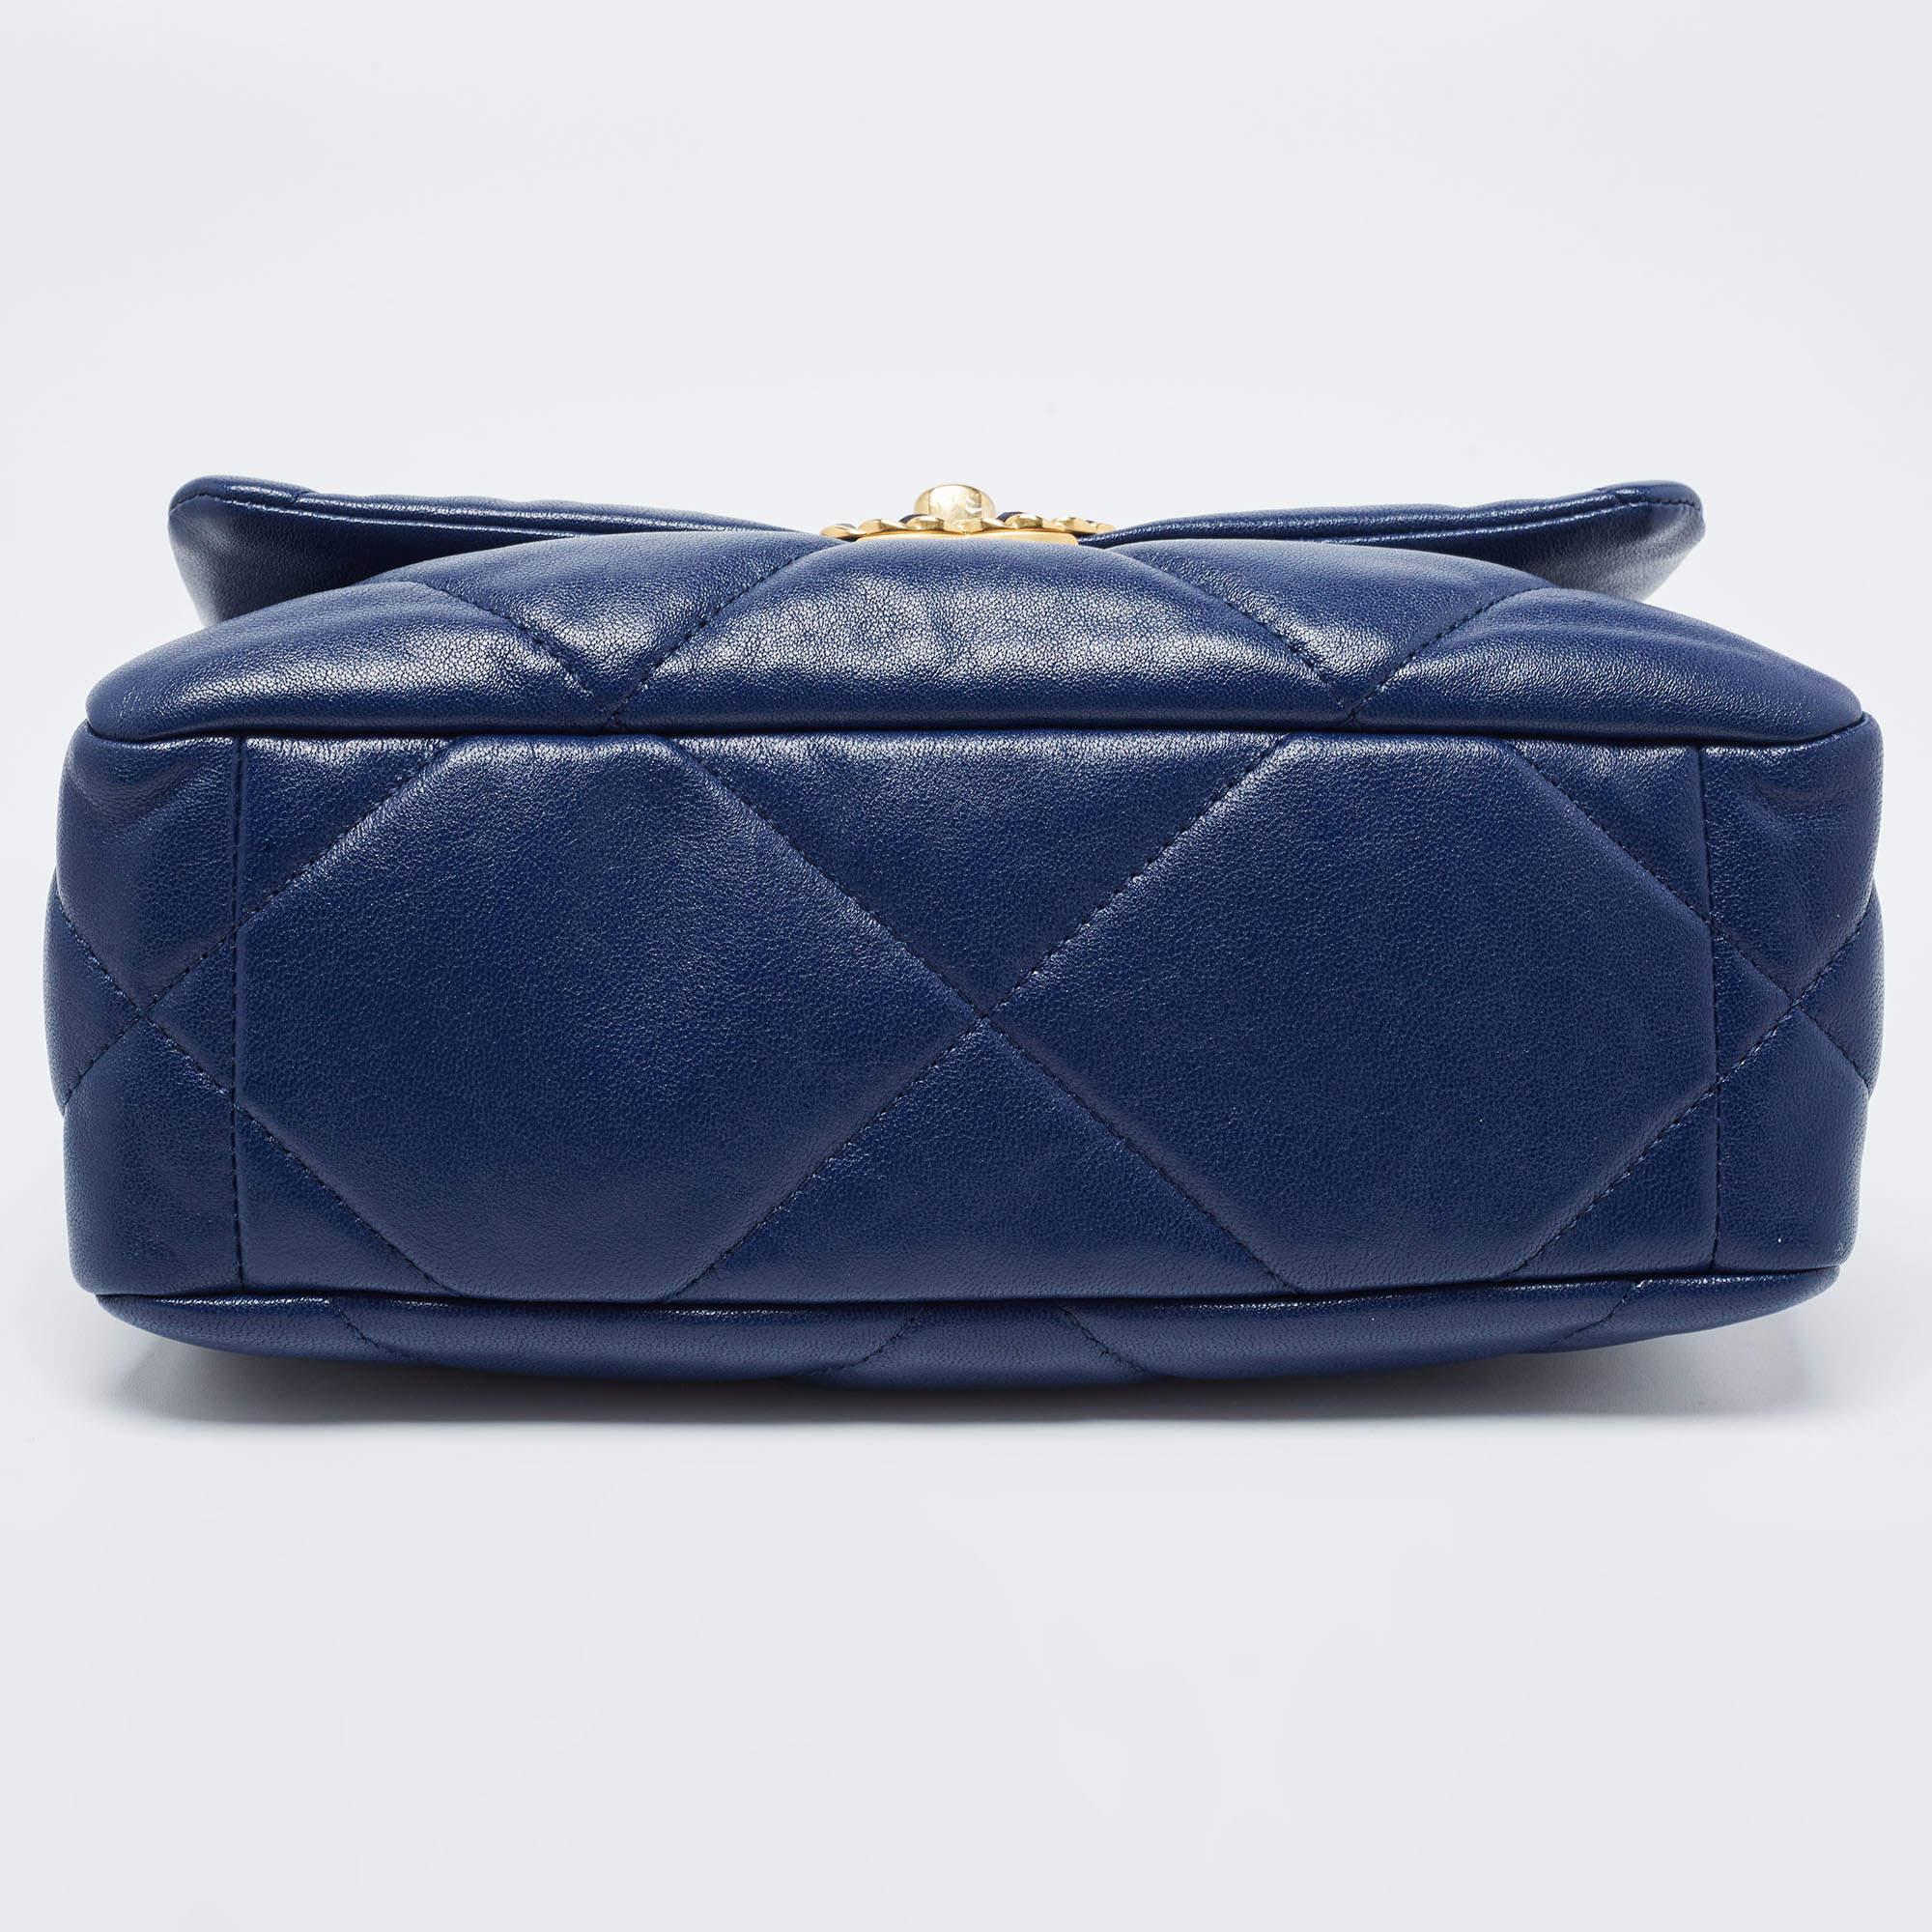 Chanel Blue Quilted Leather Medium 19 Flap Bag For Sale 3